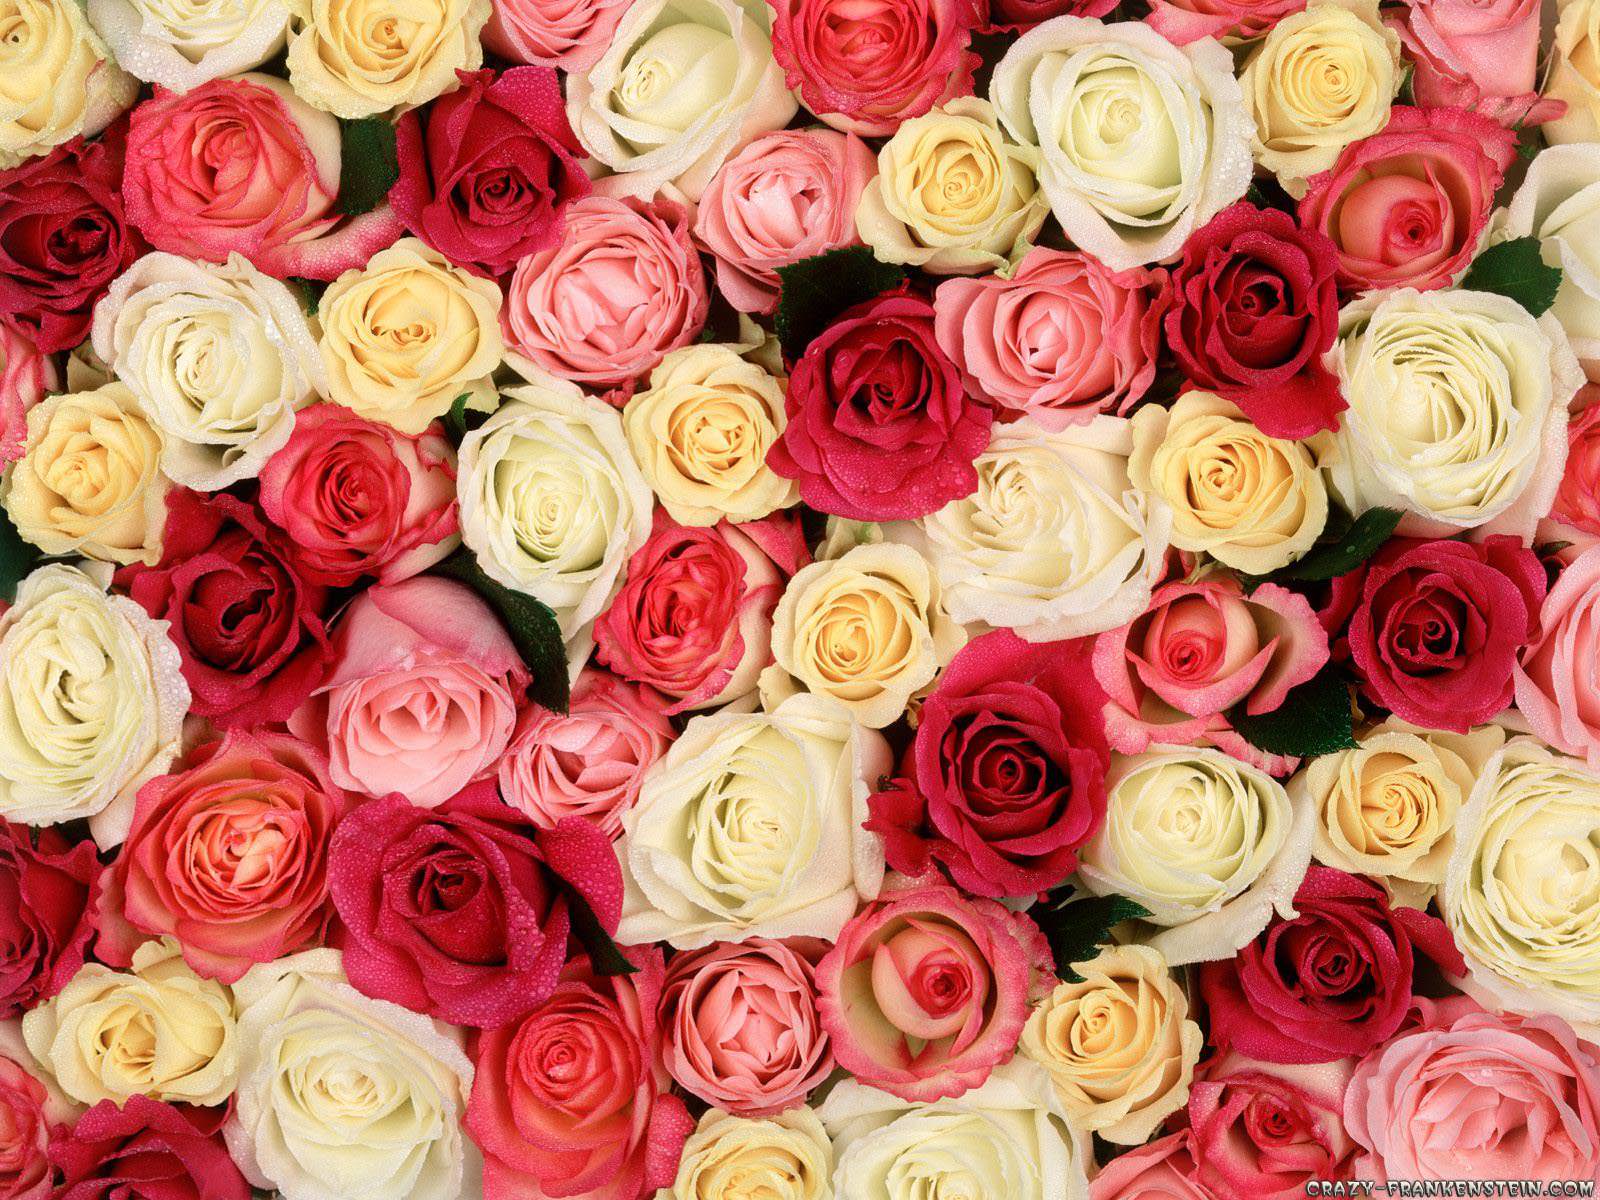 Roses Background, Wallpaper, Image, Picture. Design Trends